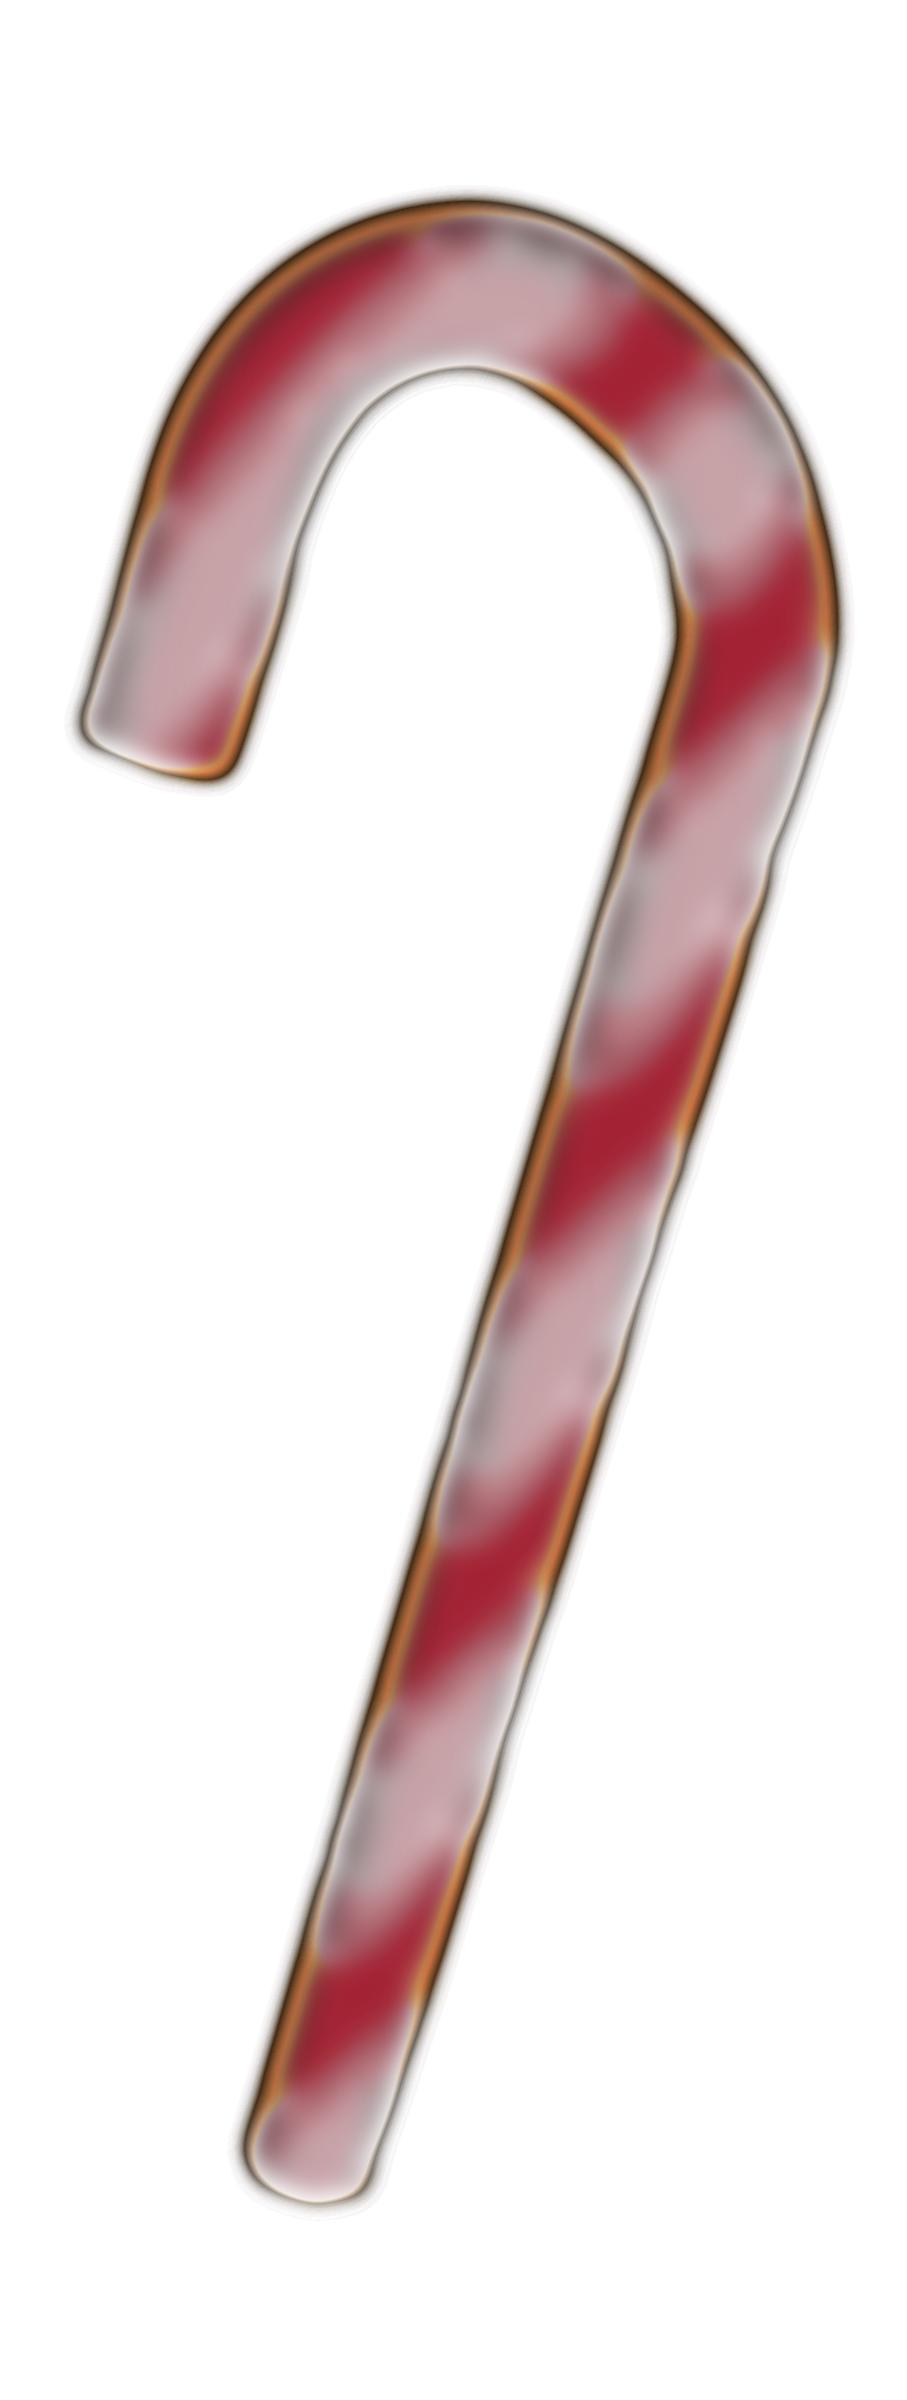 Candy Cane png transparent